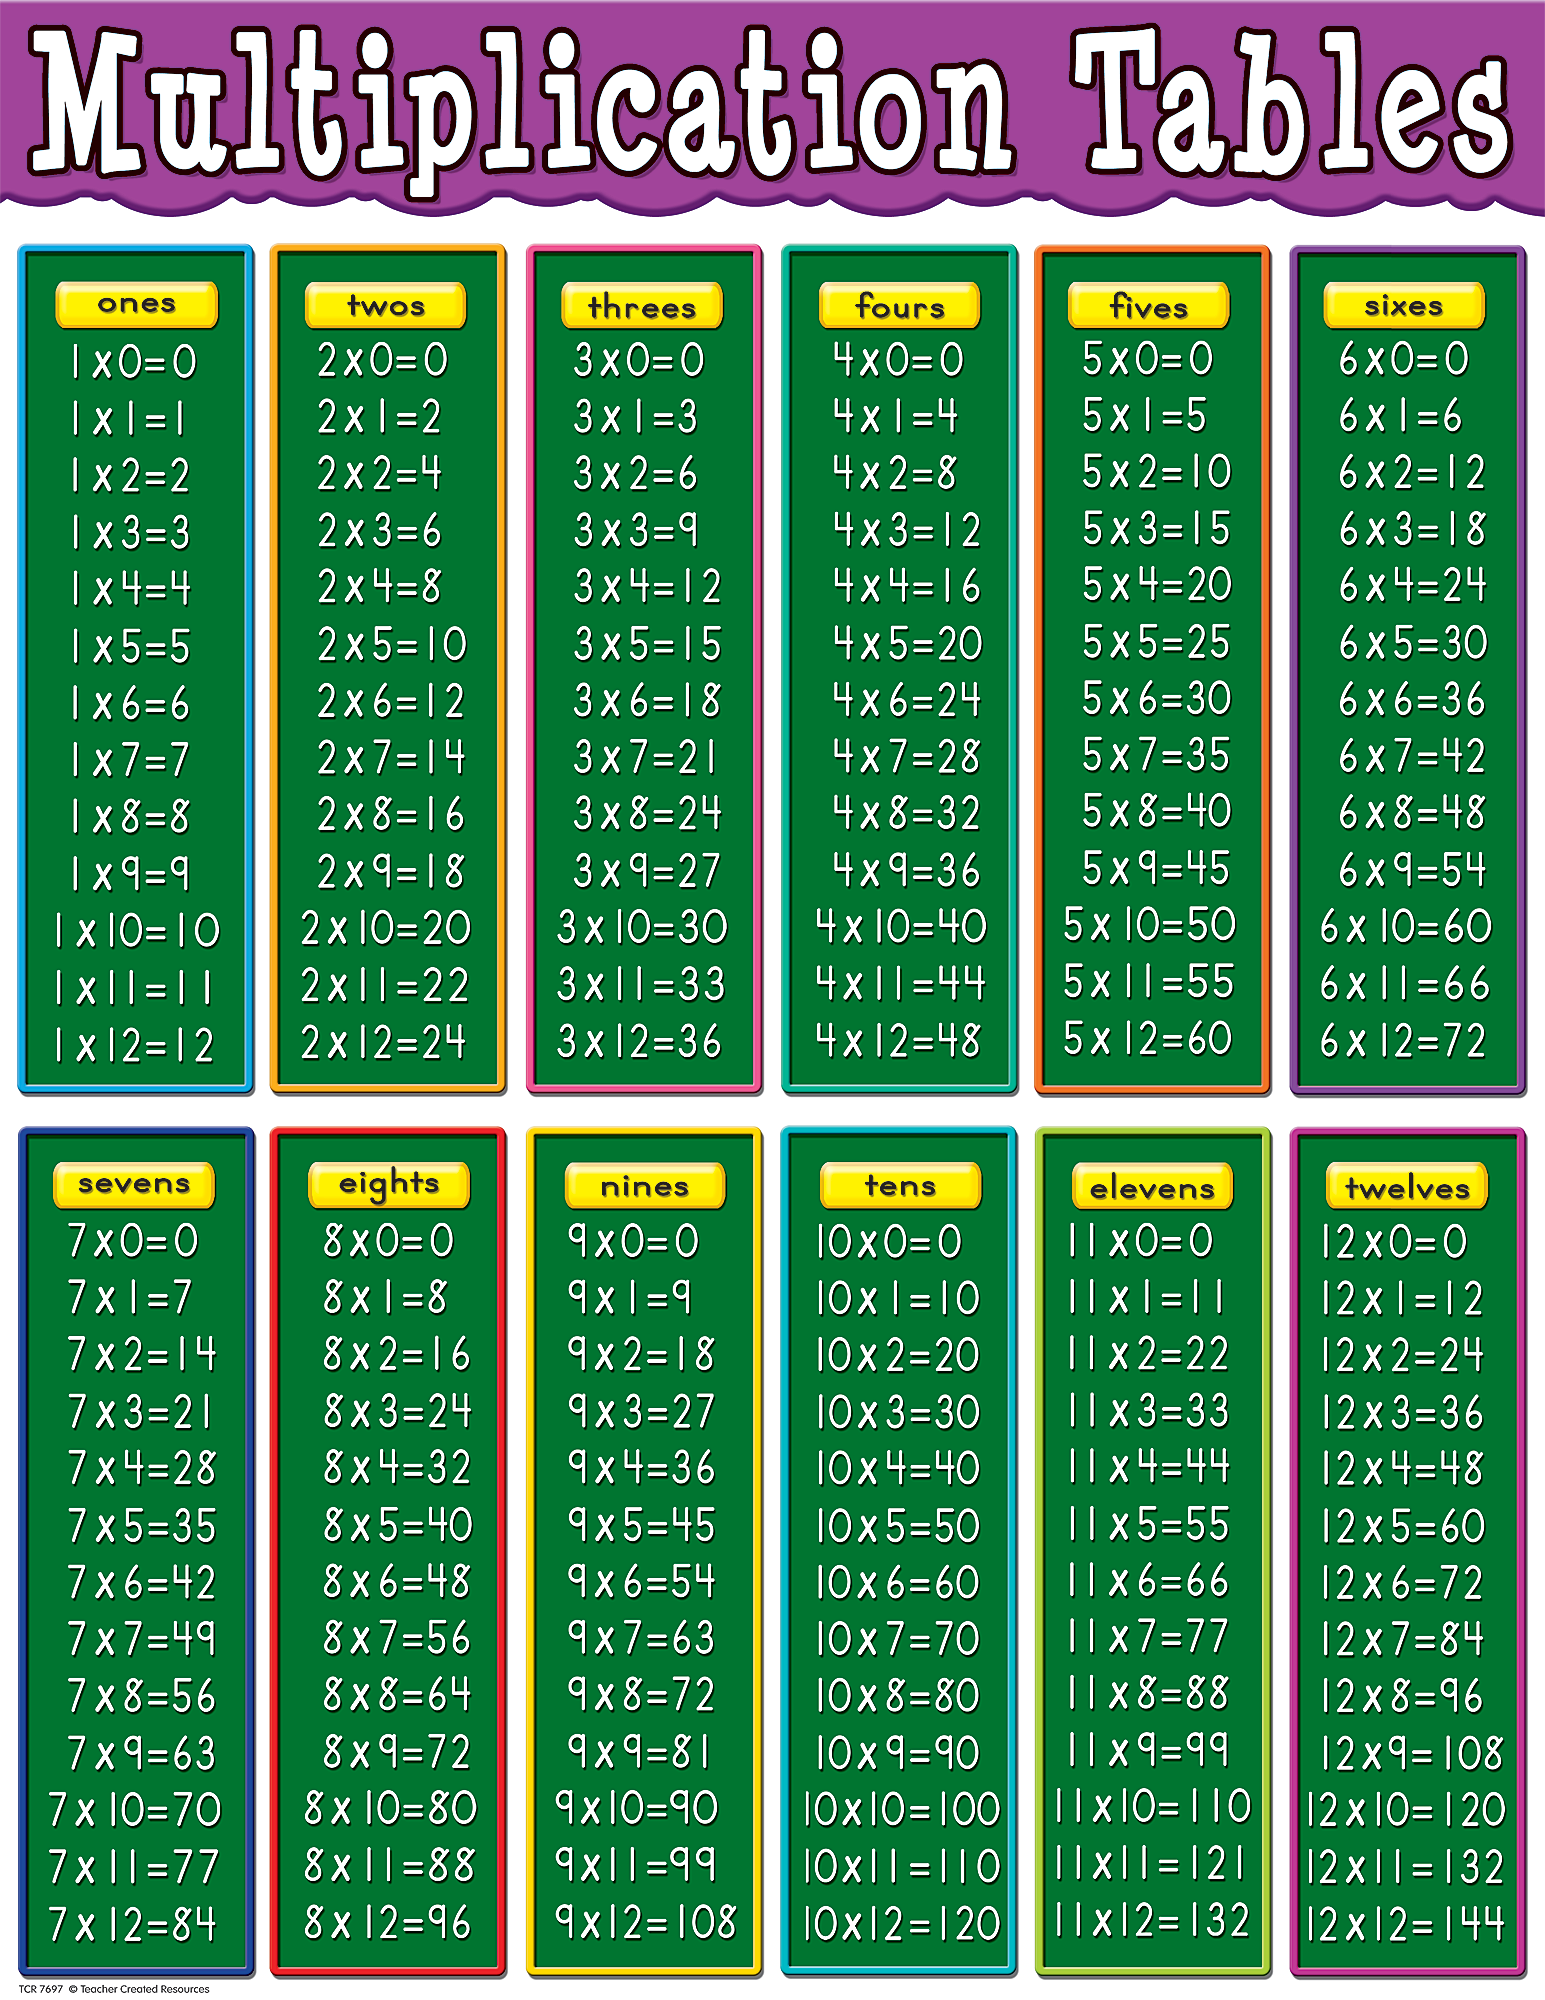 Multiplication Tables Chart